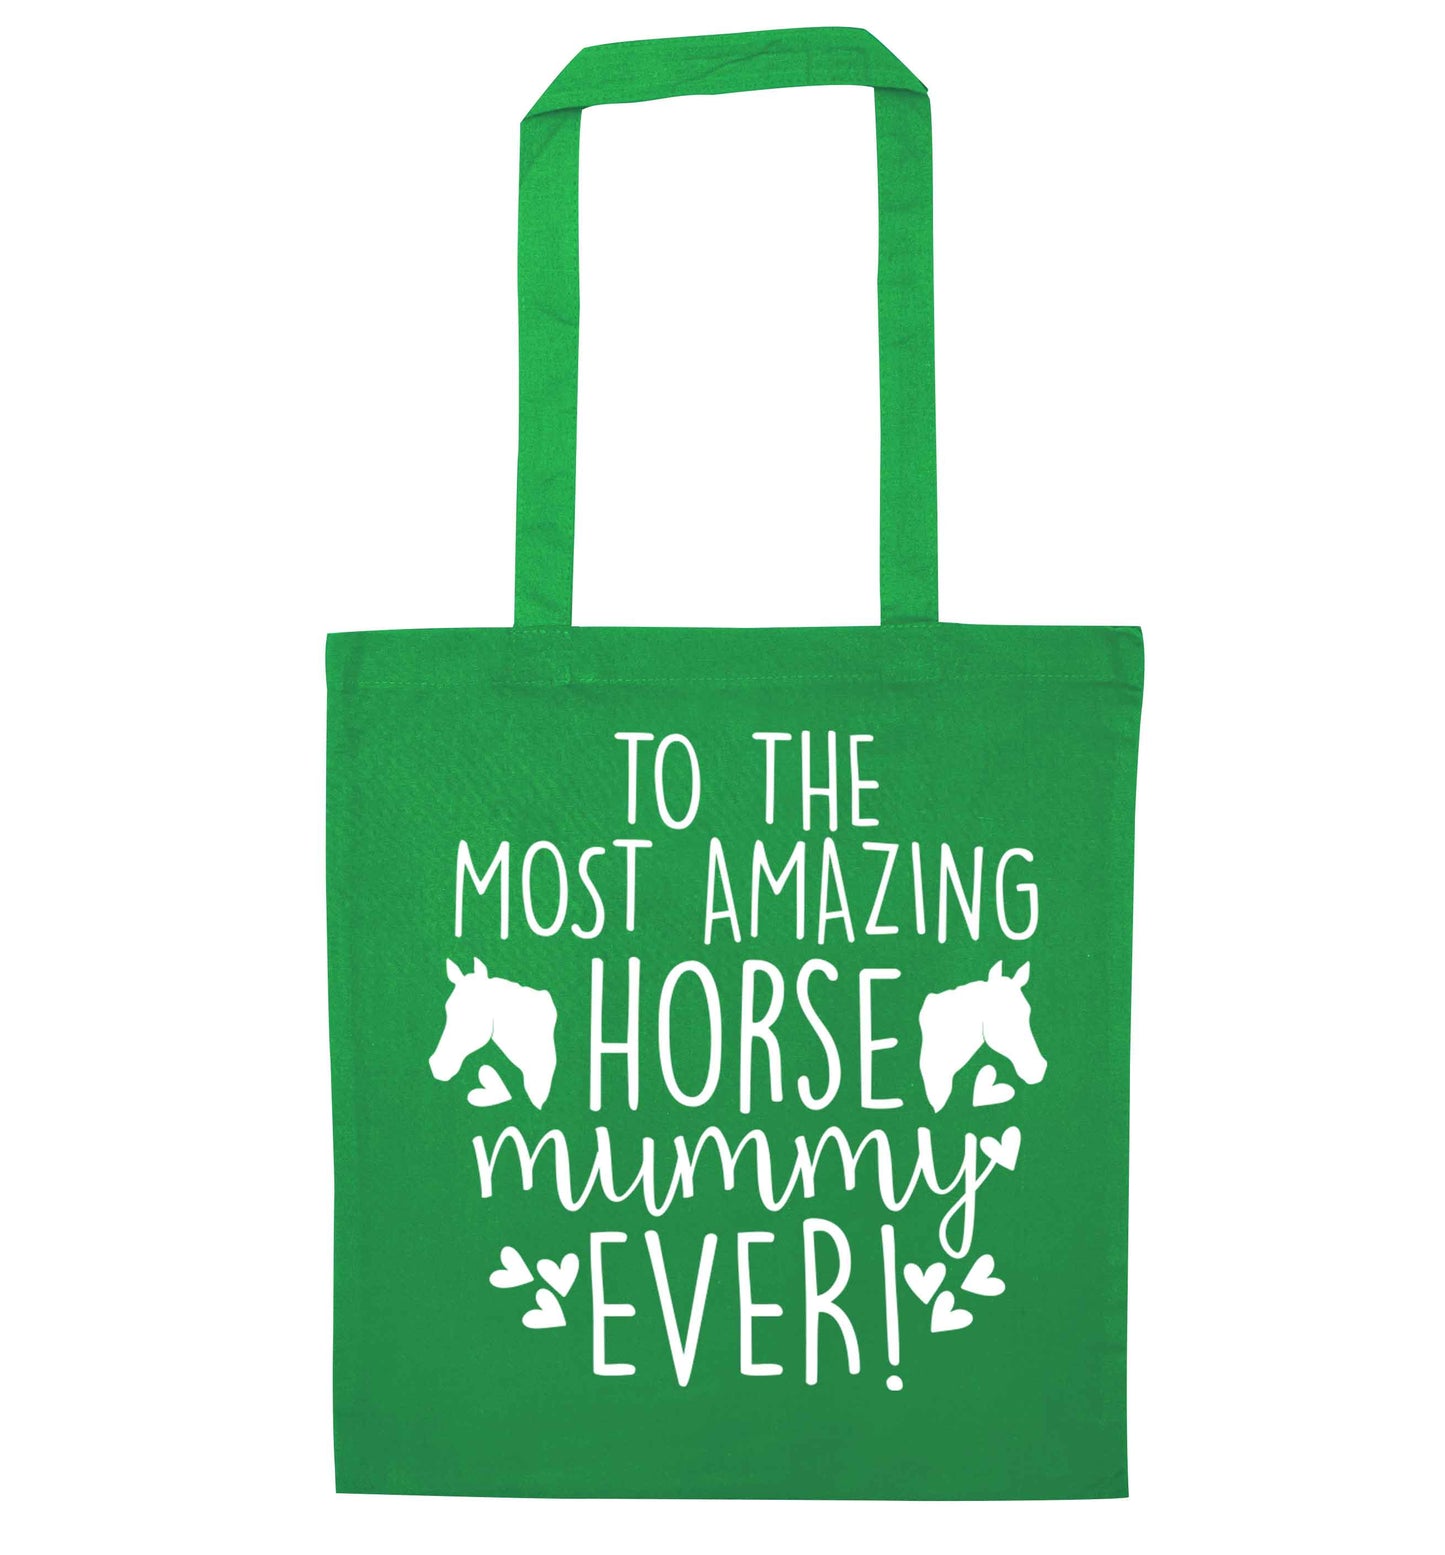 To the most amazing horse mummy ever! green tote bag